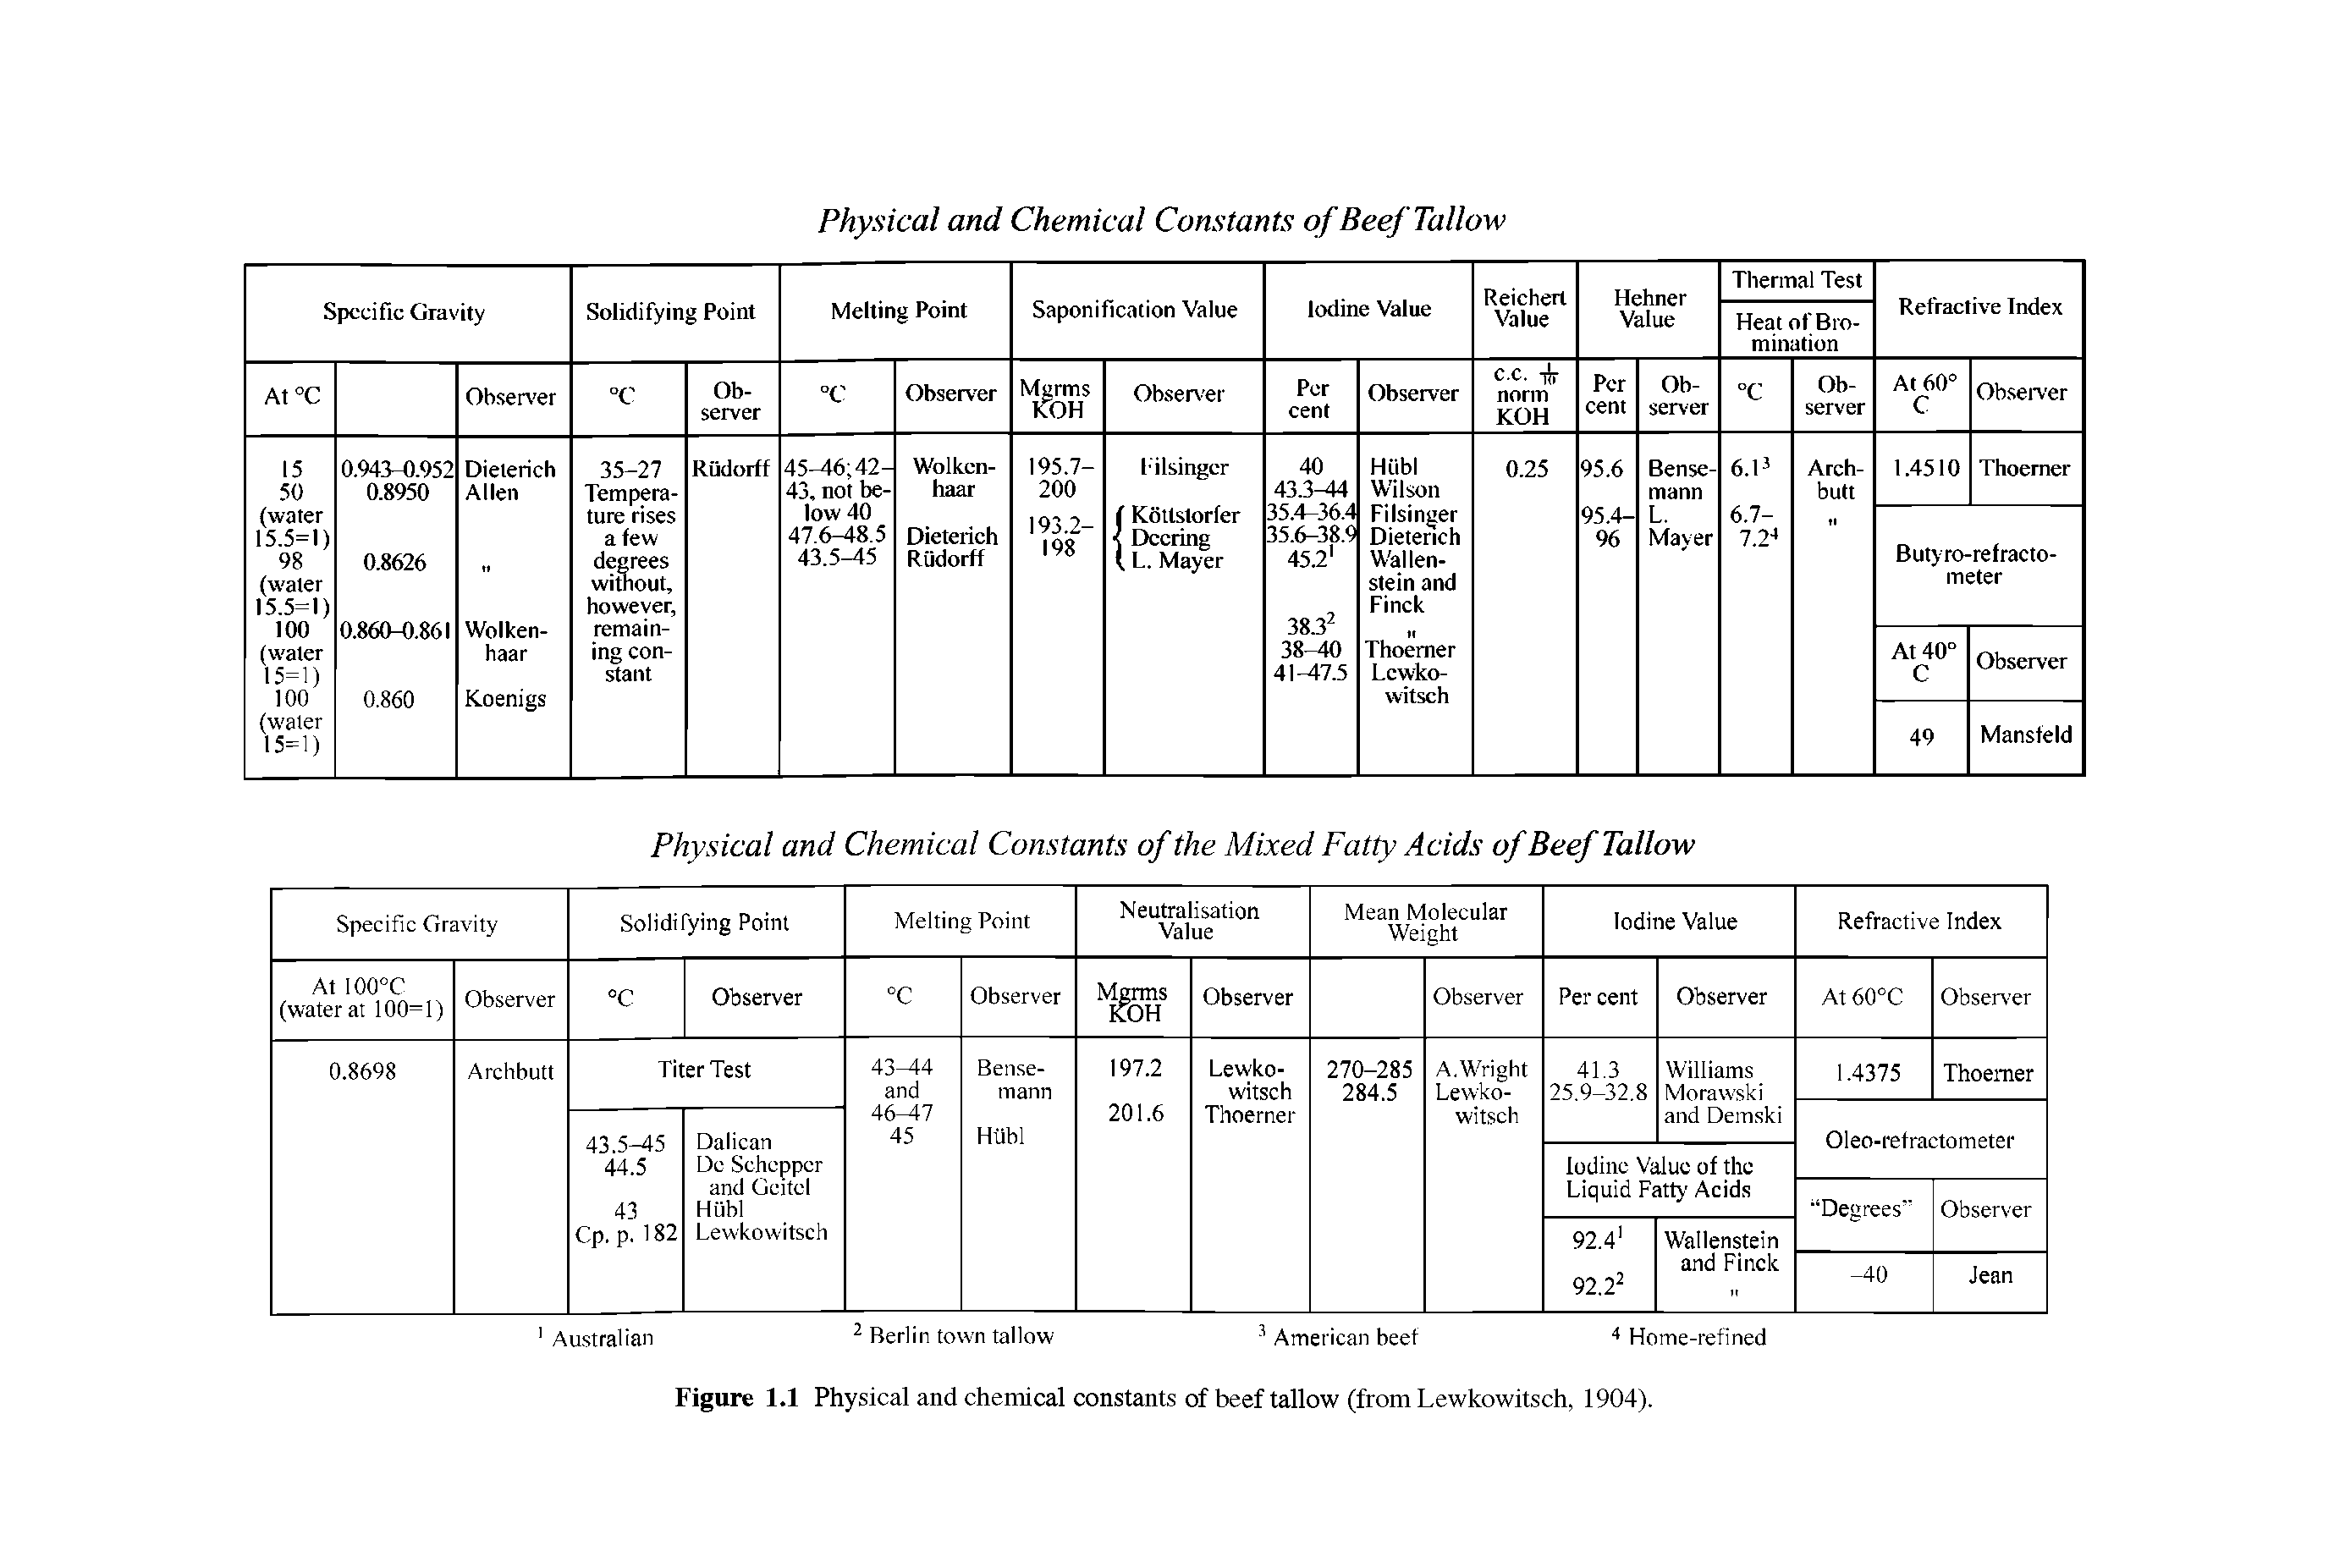 Figure 1.1 Physical and chemical constants of beef tallow (from Lewkowitsch, 1904).